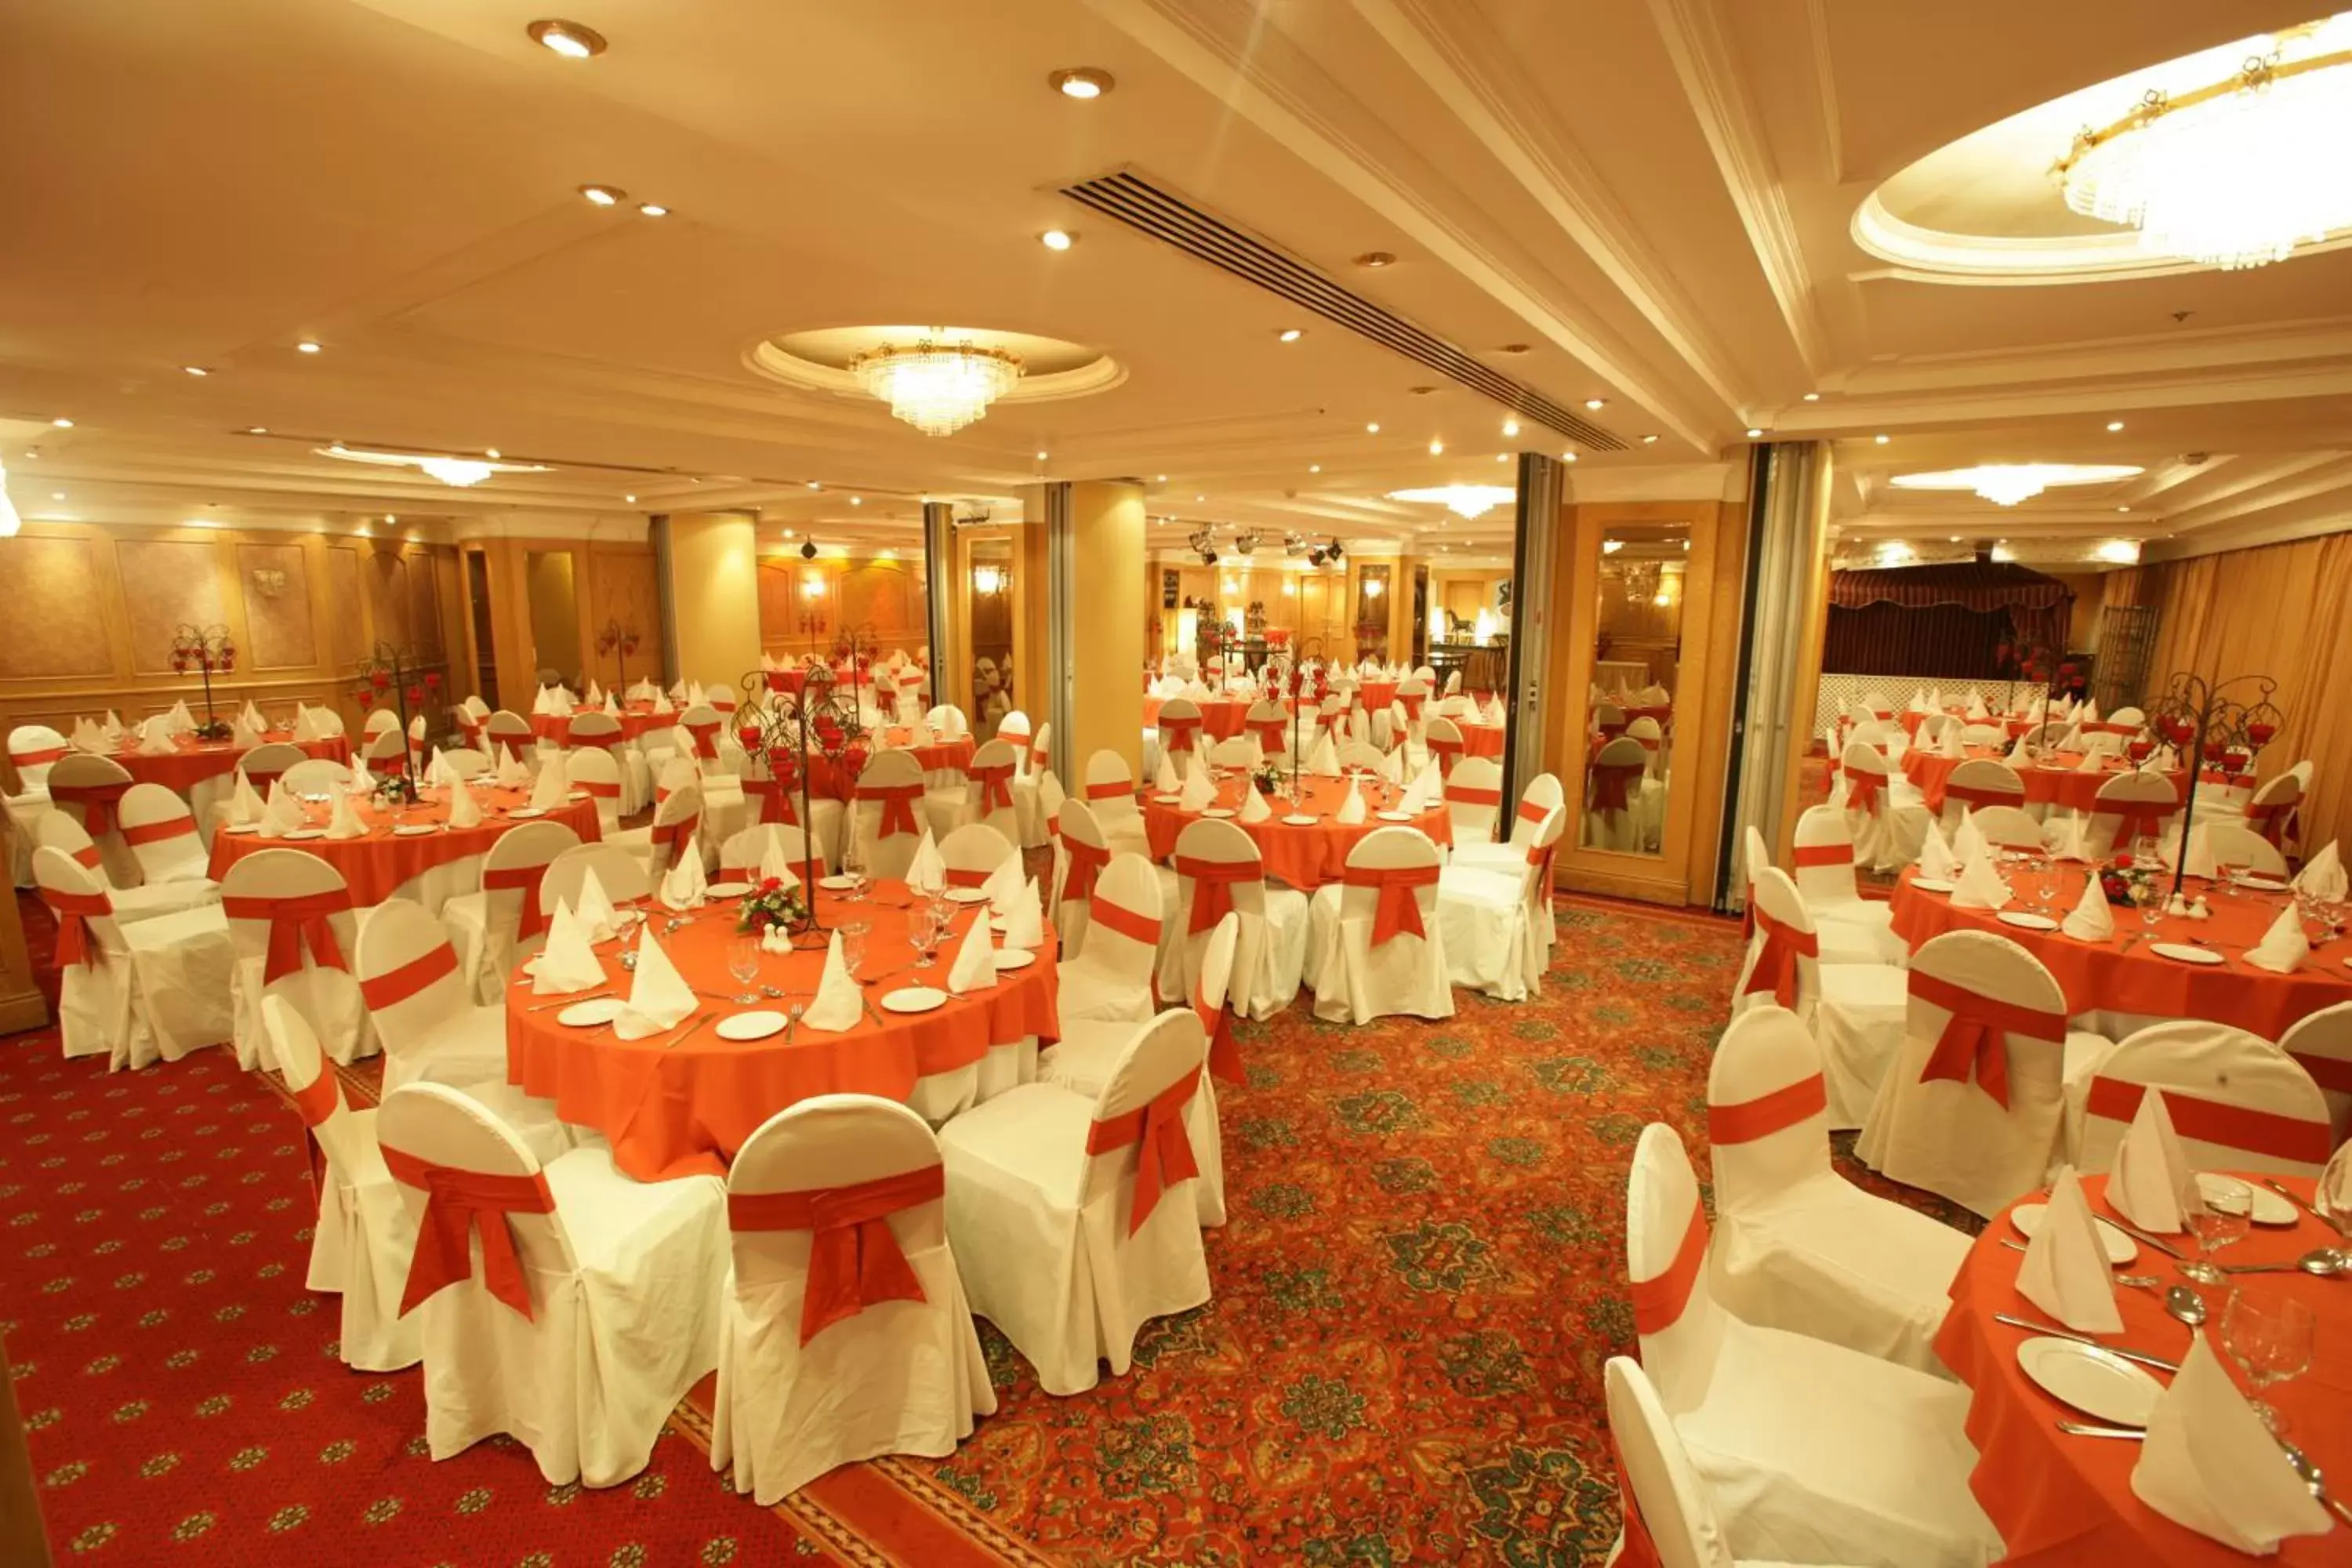 Decorative detail, Banquet Facilities in Marco Polo Hotel